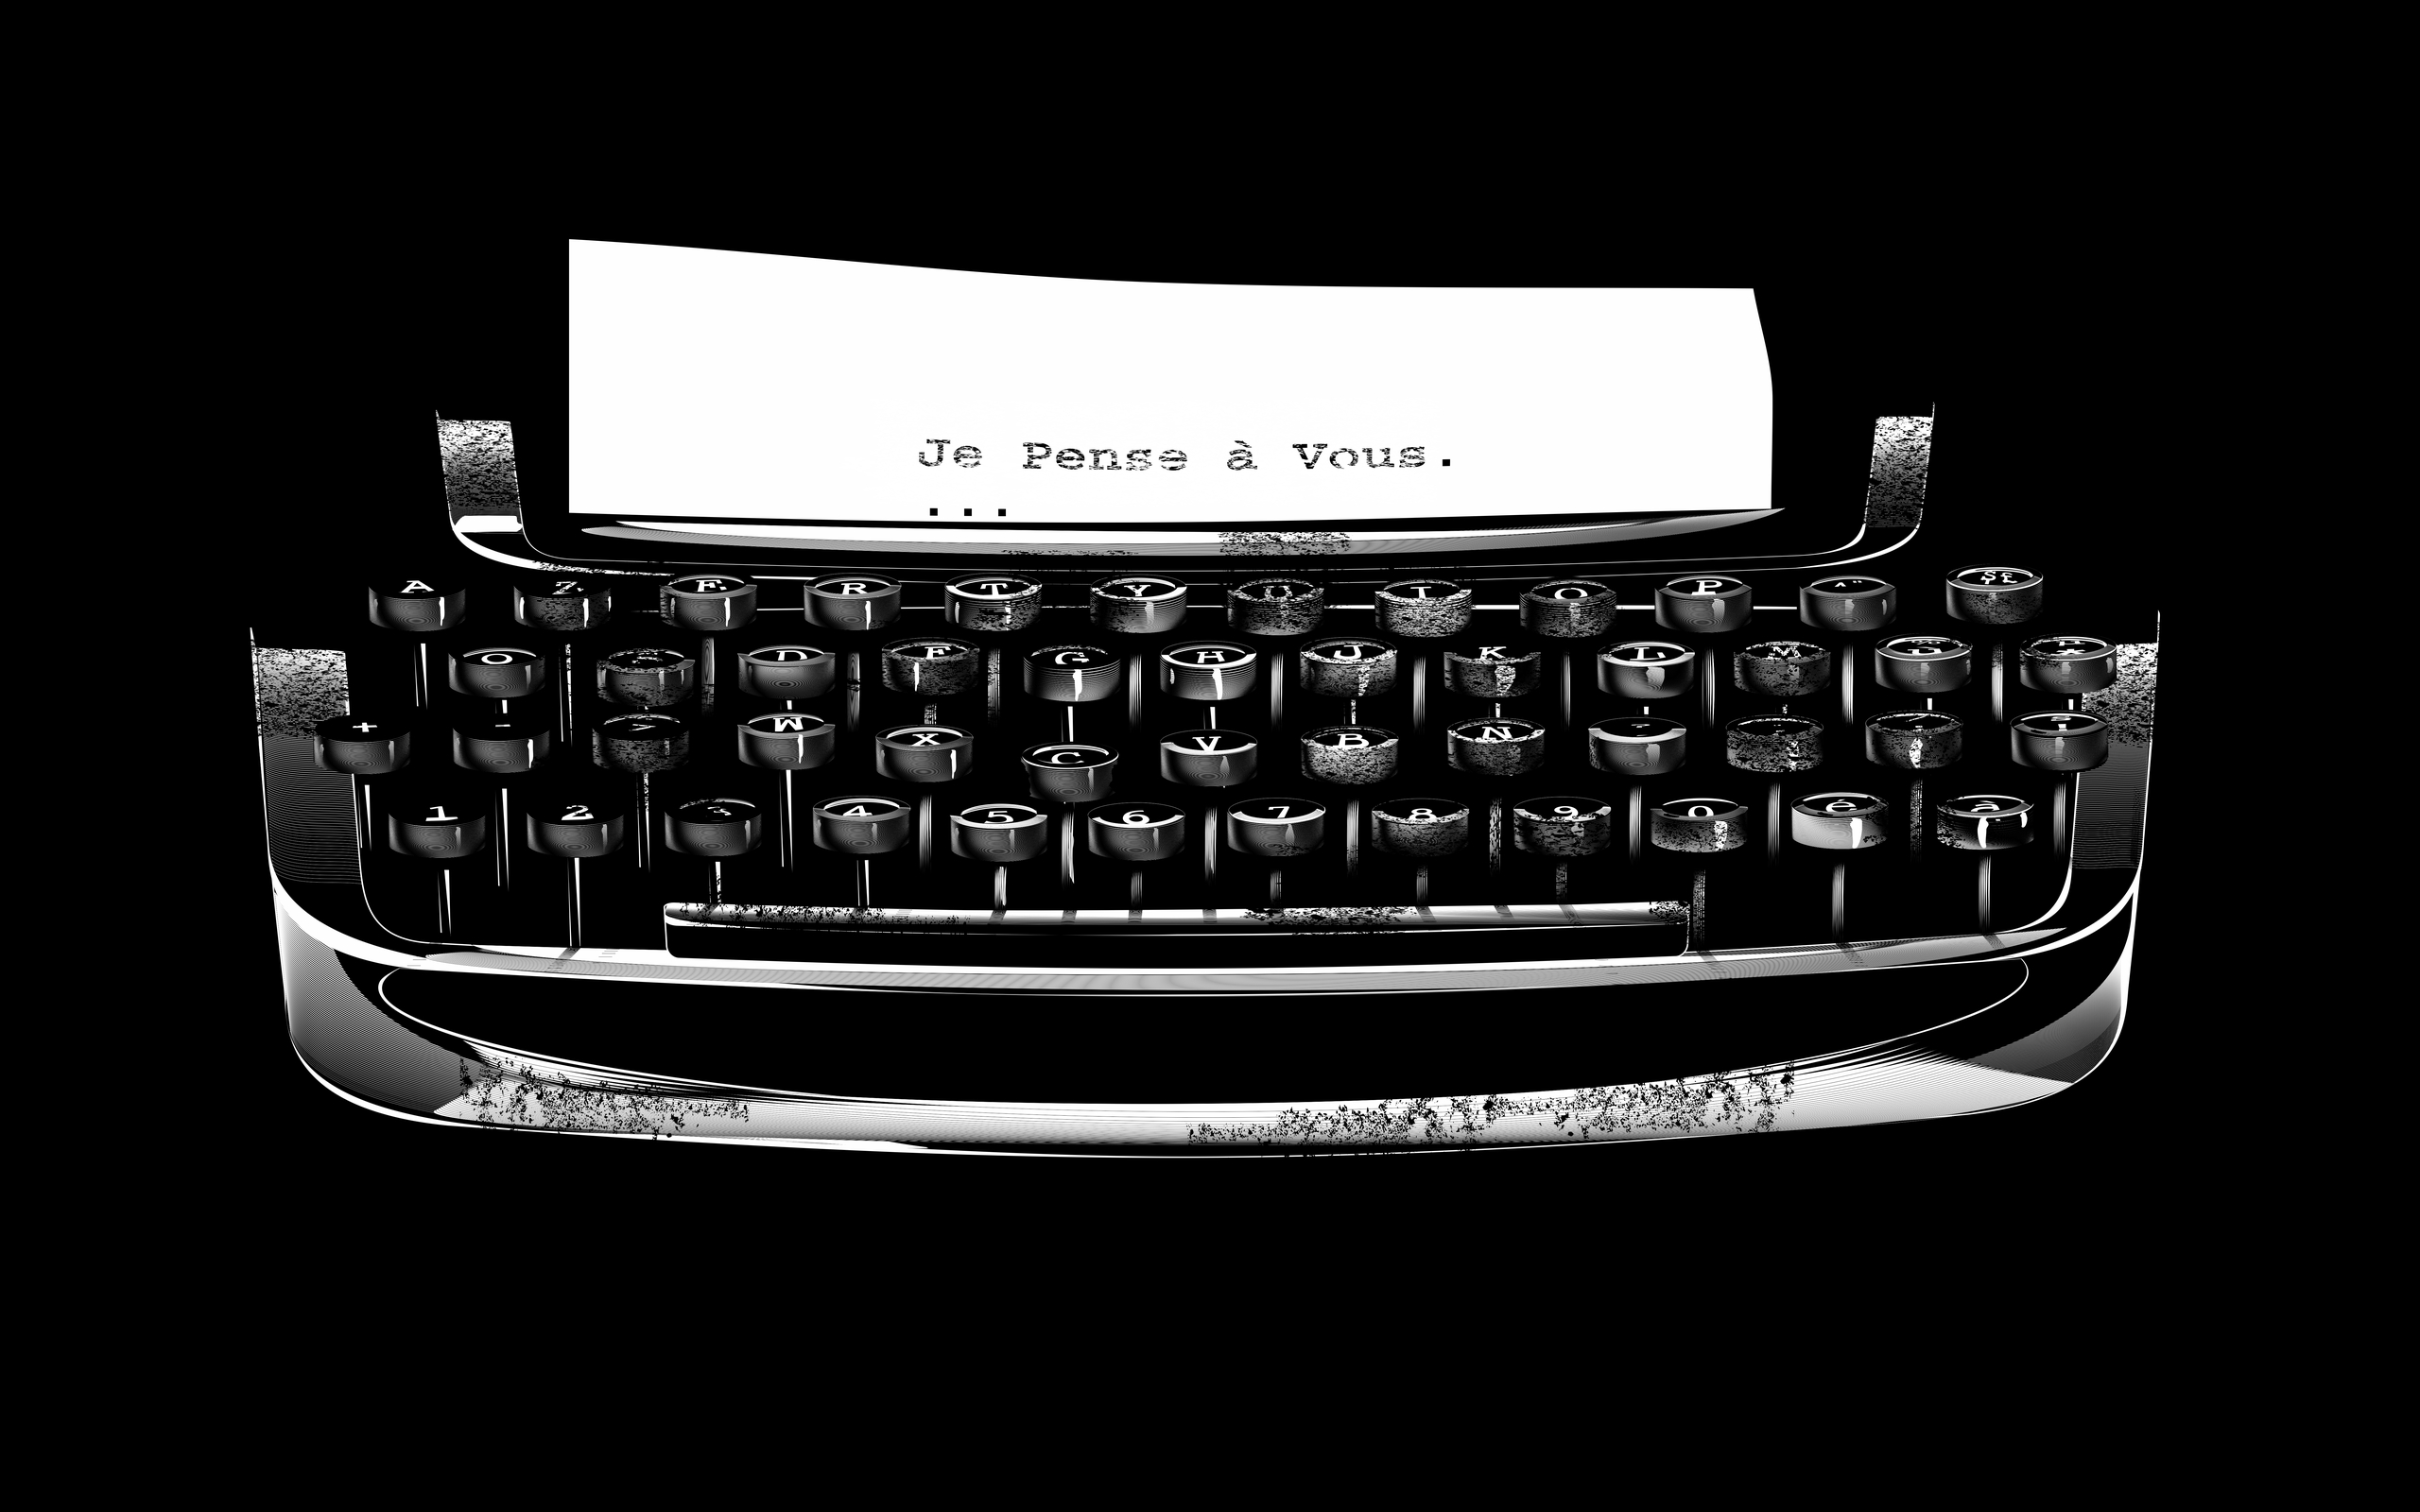 Typewriter HD Wallpapers and Backgrounds